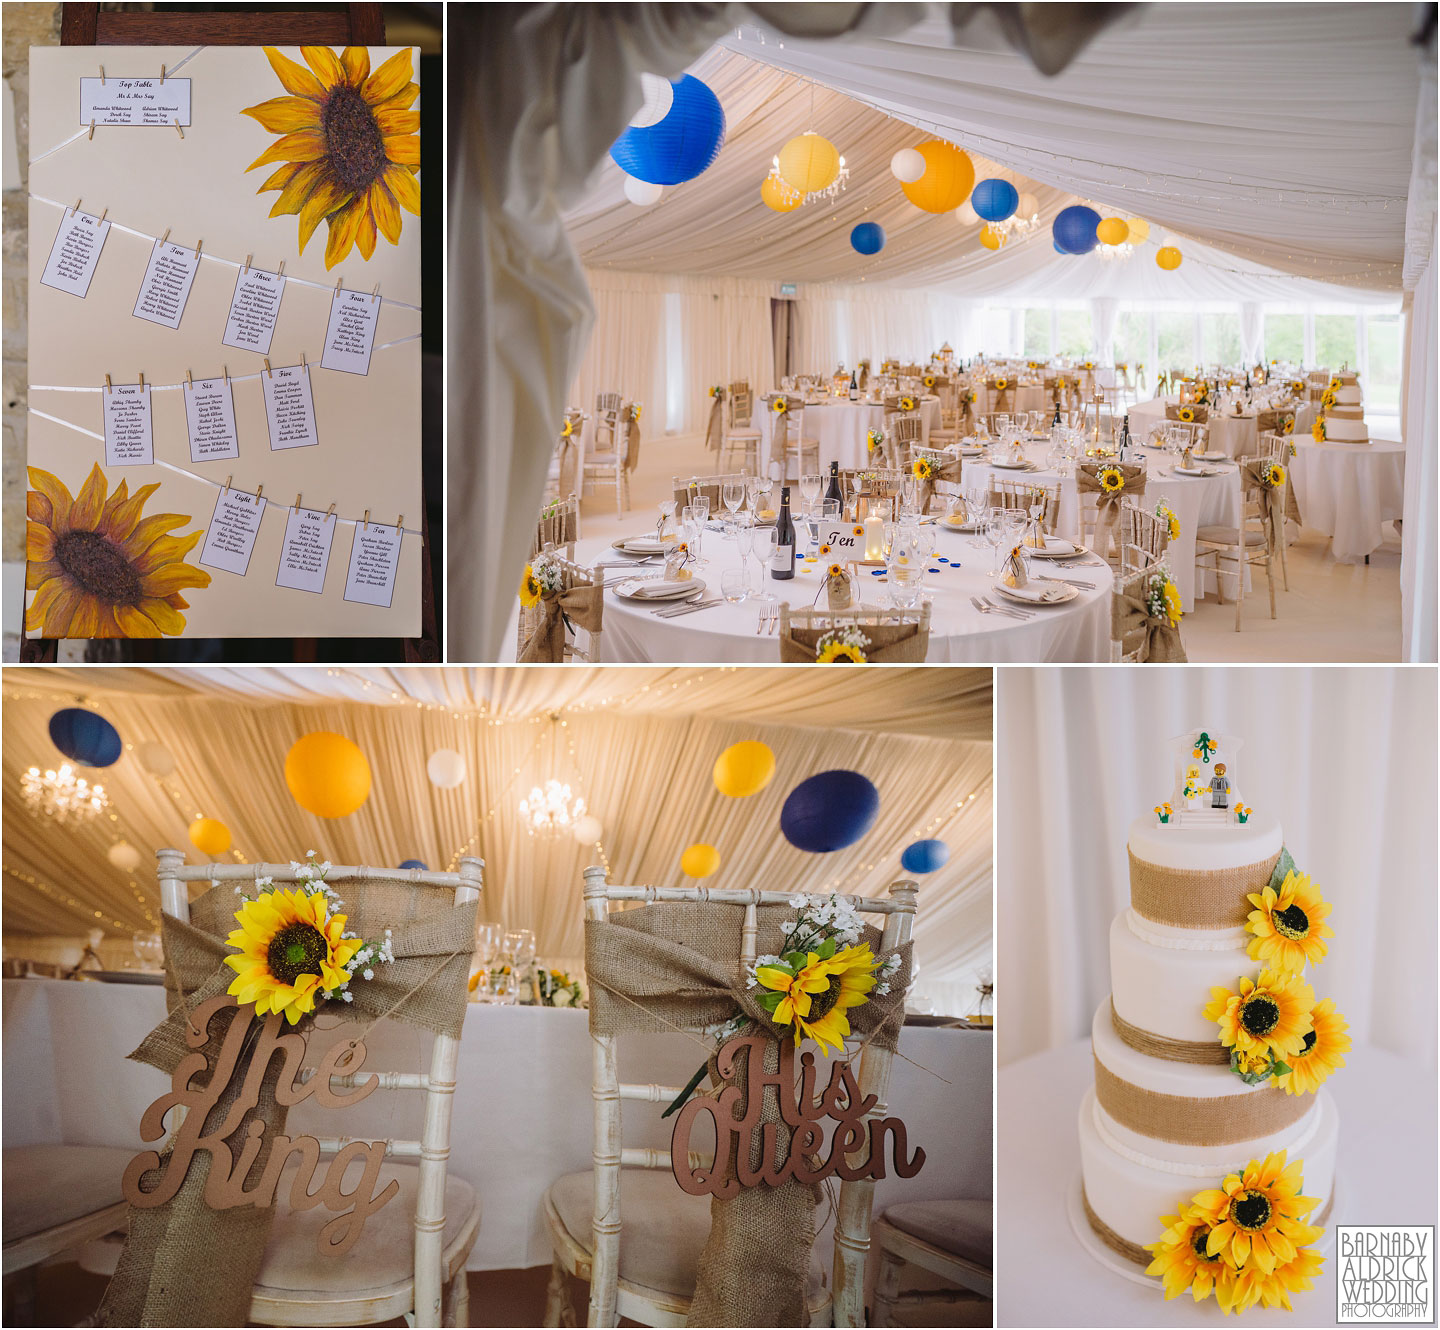 Priory Cottages Wedding Marquee, Meal space at Priory Cottages Yorkshire, Bright white travel themed wedding marquee, Wedding breakfast ideas